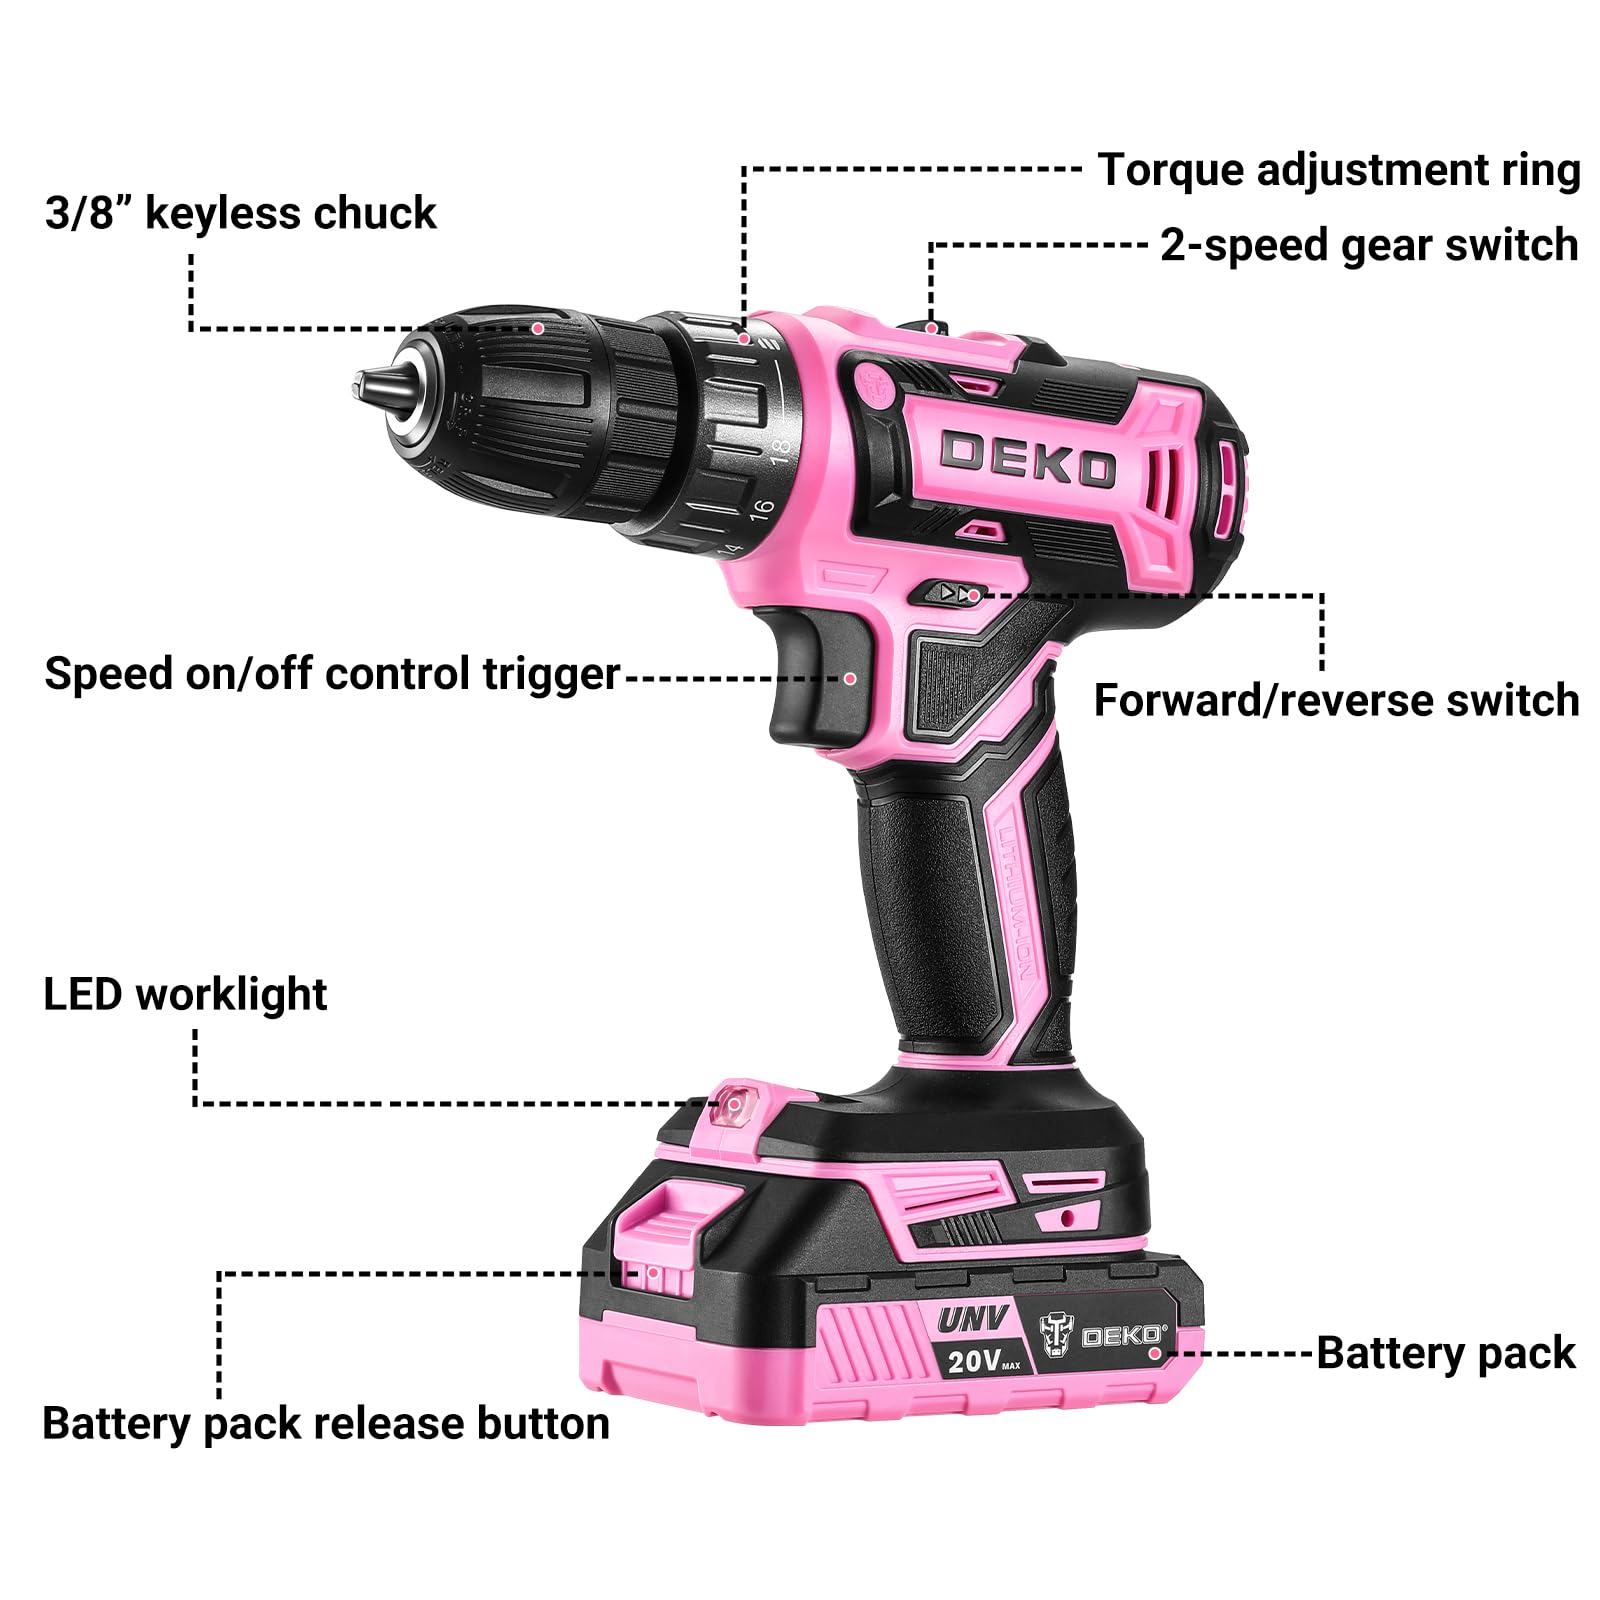 Power Drill Cordless: DEKO PRO Pink Cordless Drill 20V Electric Power Drill Set Tool for Women Drills Cordless with Battery and Charger Drill Driver 20 Volt Drill Driver Kit